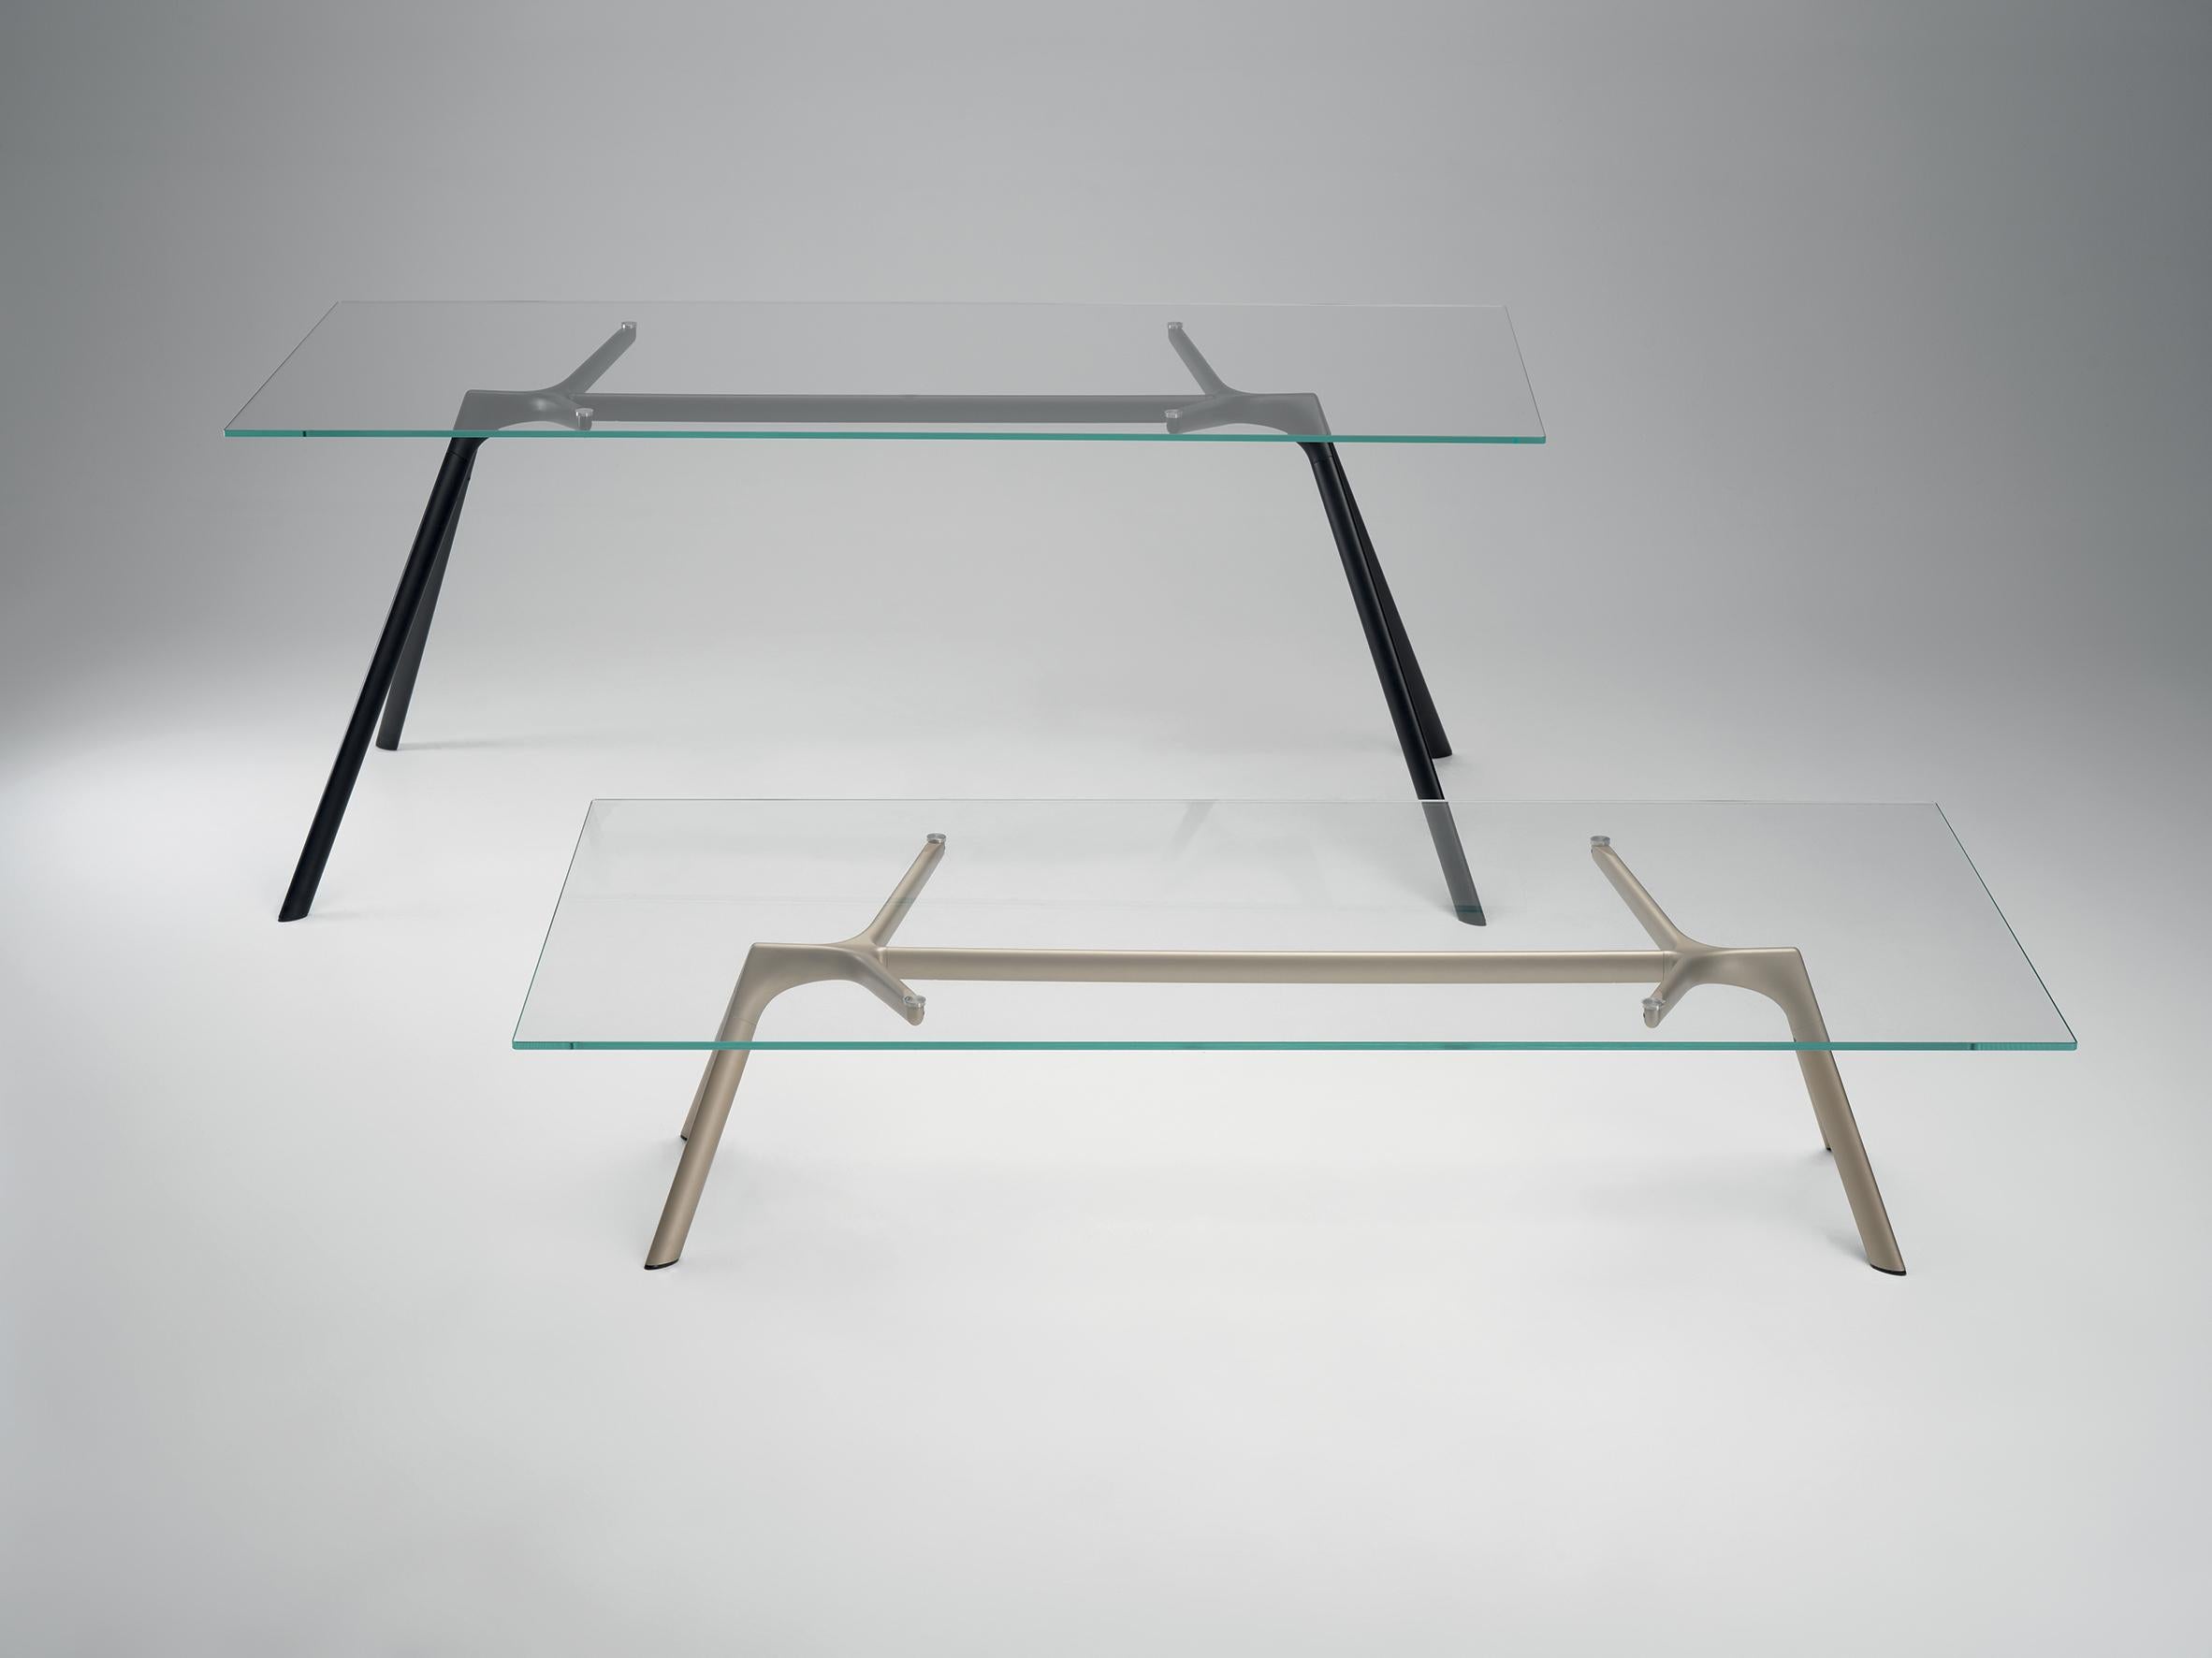 Alias Small Dry XS 45B Table in Glass Top with Anodised Gold Metallic Lacquered Aluminium Frame by Alberto Meda

Low table with structure made of lacquered aluminium elements. Top in extra light tempered glass, thickness 10 mm.

Born in Lenno